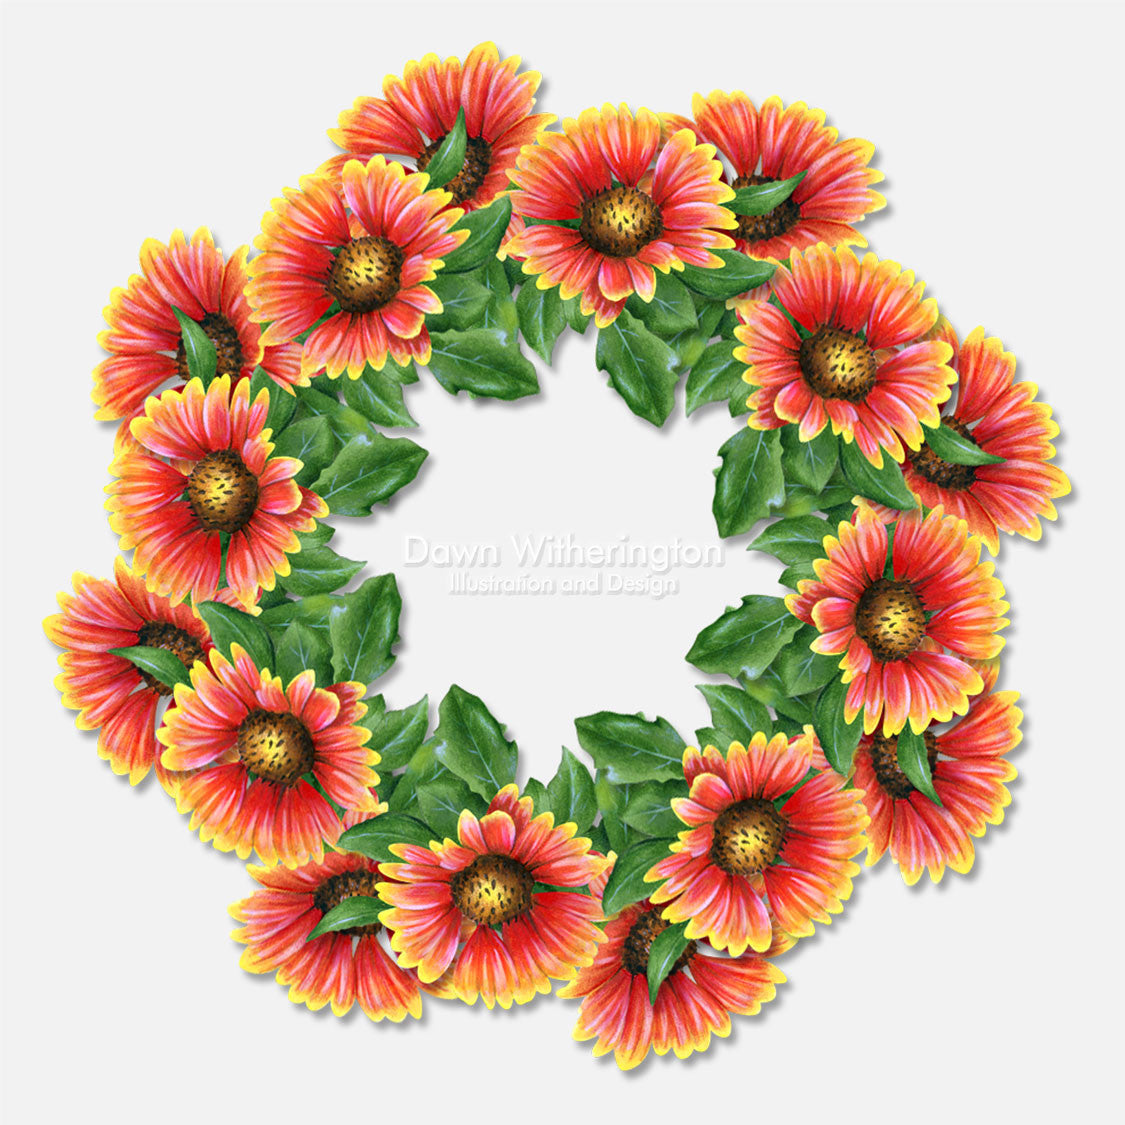 This colorful illustration is of Indian blanket flowers in a graphical arrangement.